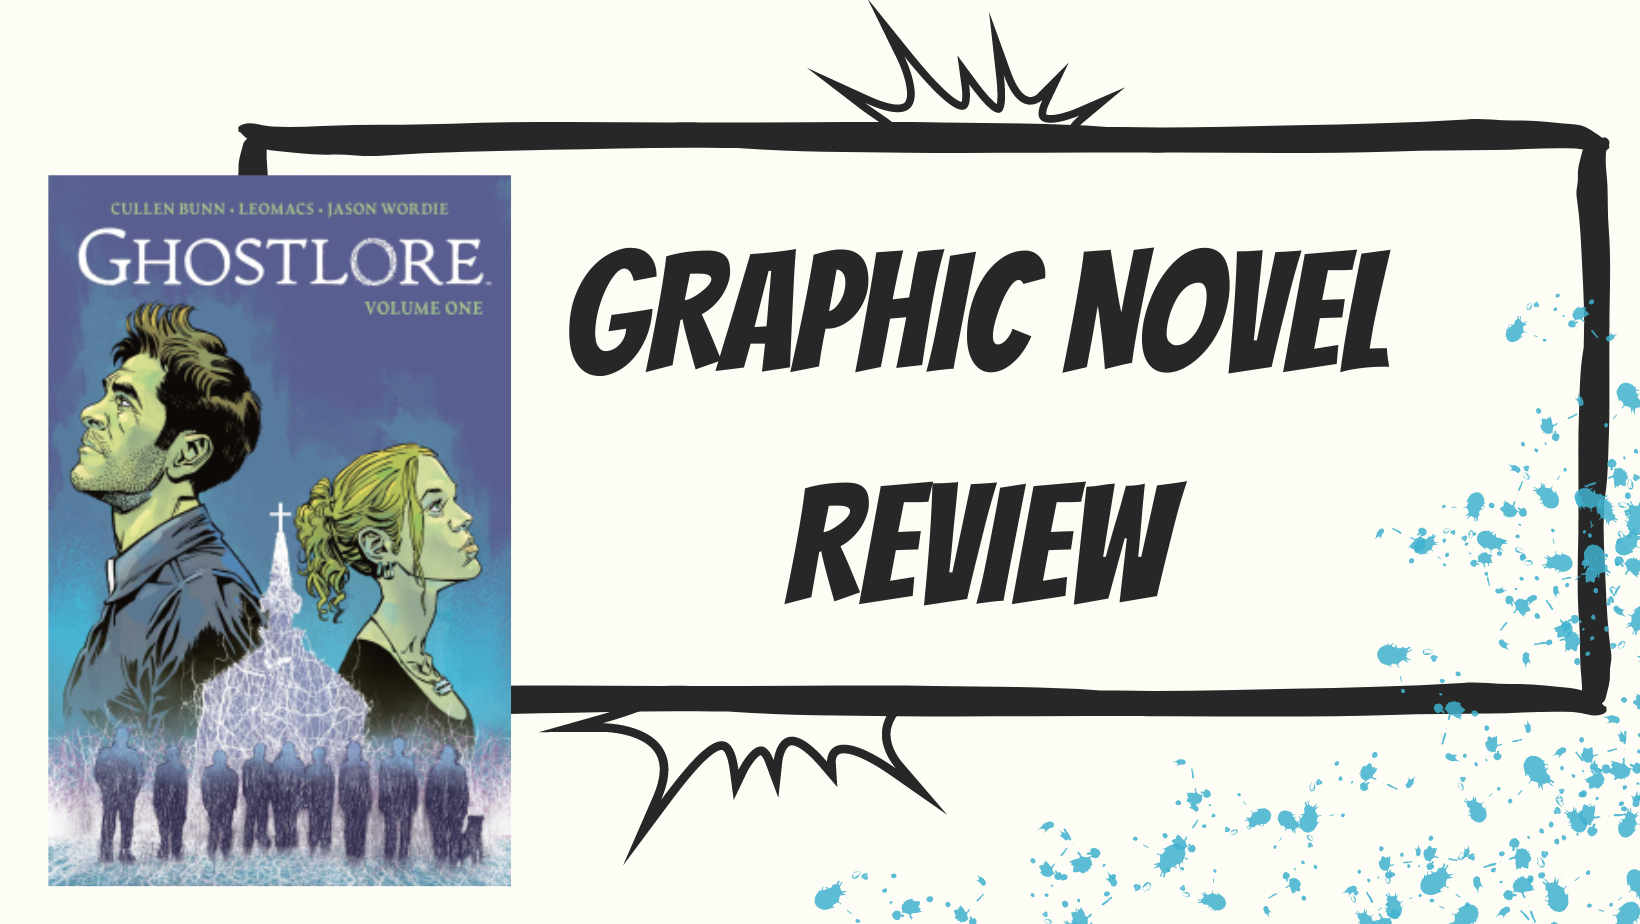 Graphic Novel Review: Ghostlore, Vol. 1 by Cullen Bunn and Leomacs